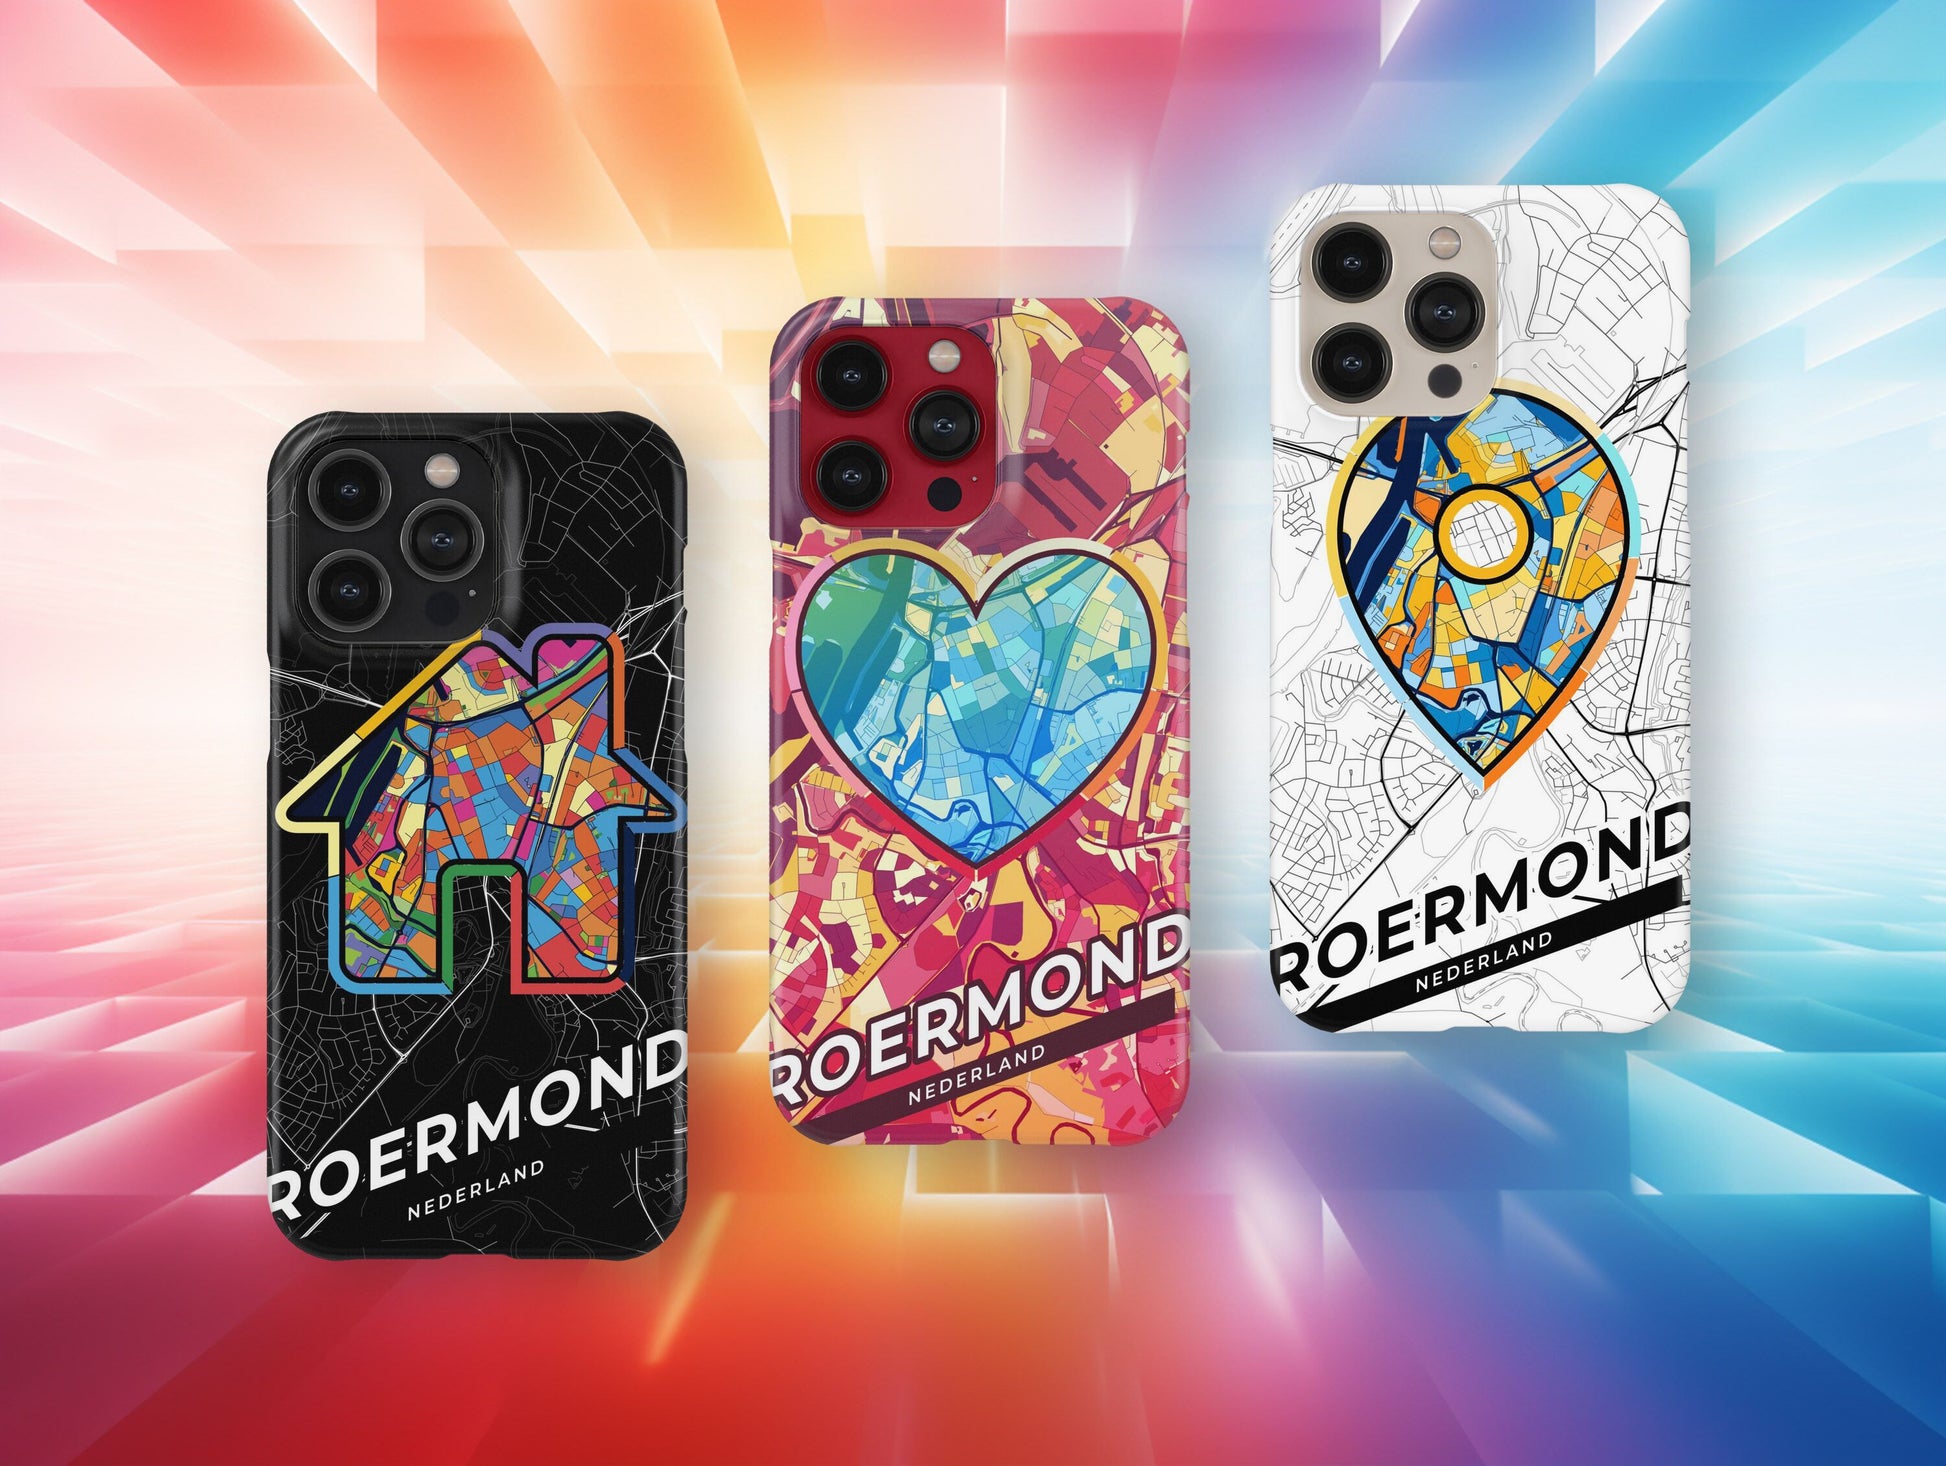 Roermond Netherlands slim phone case with colorful icon. Birthday, wedding or housewarming gift. Couple match cases.